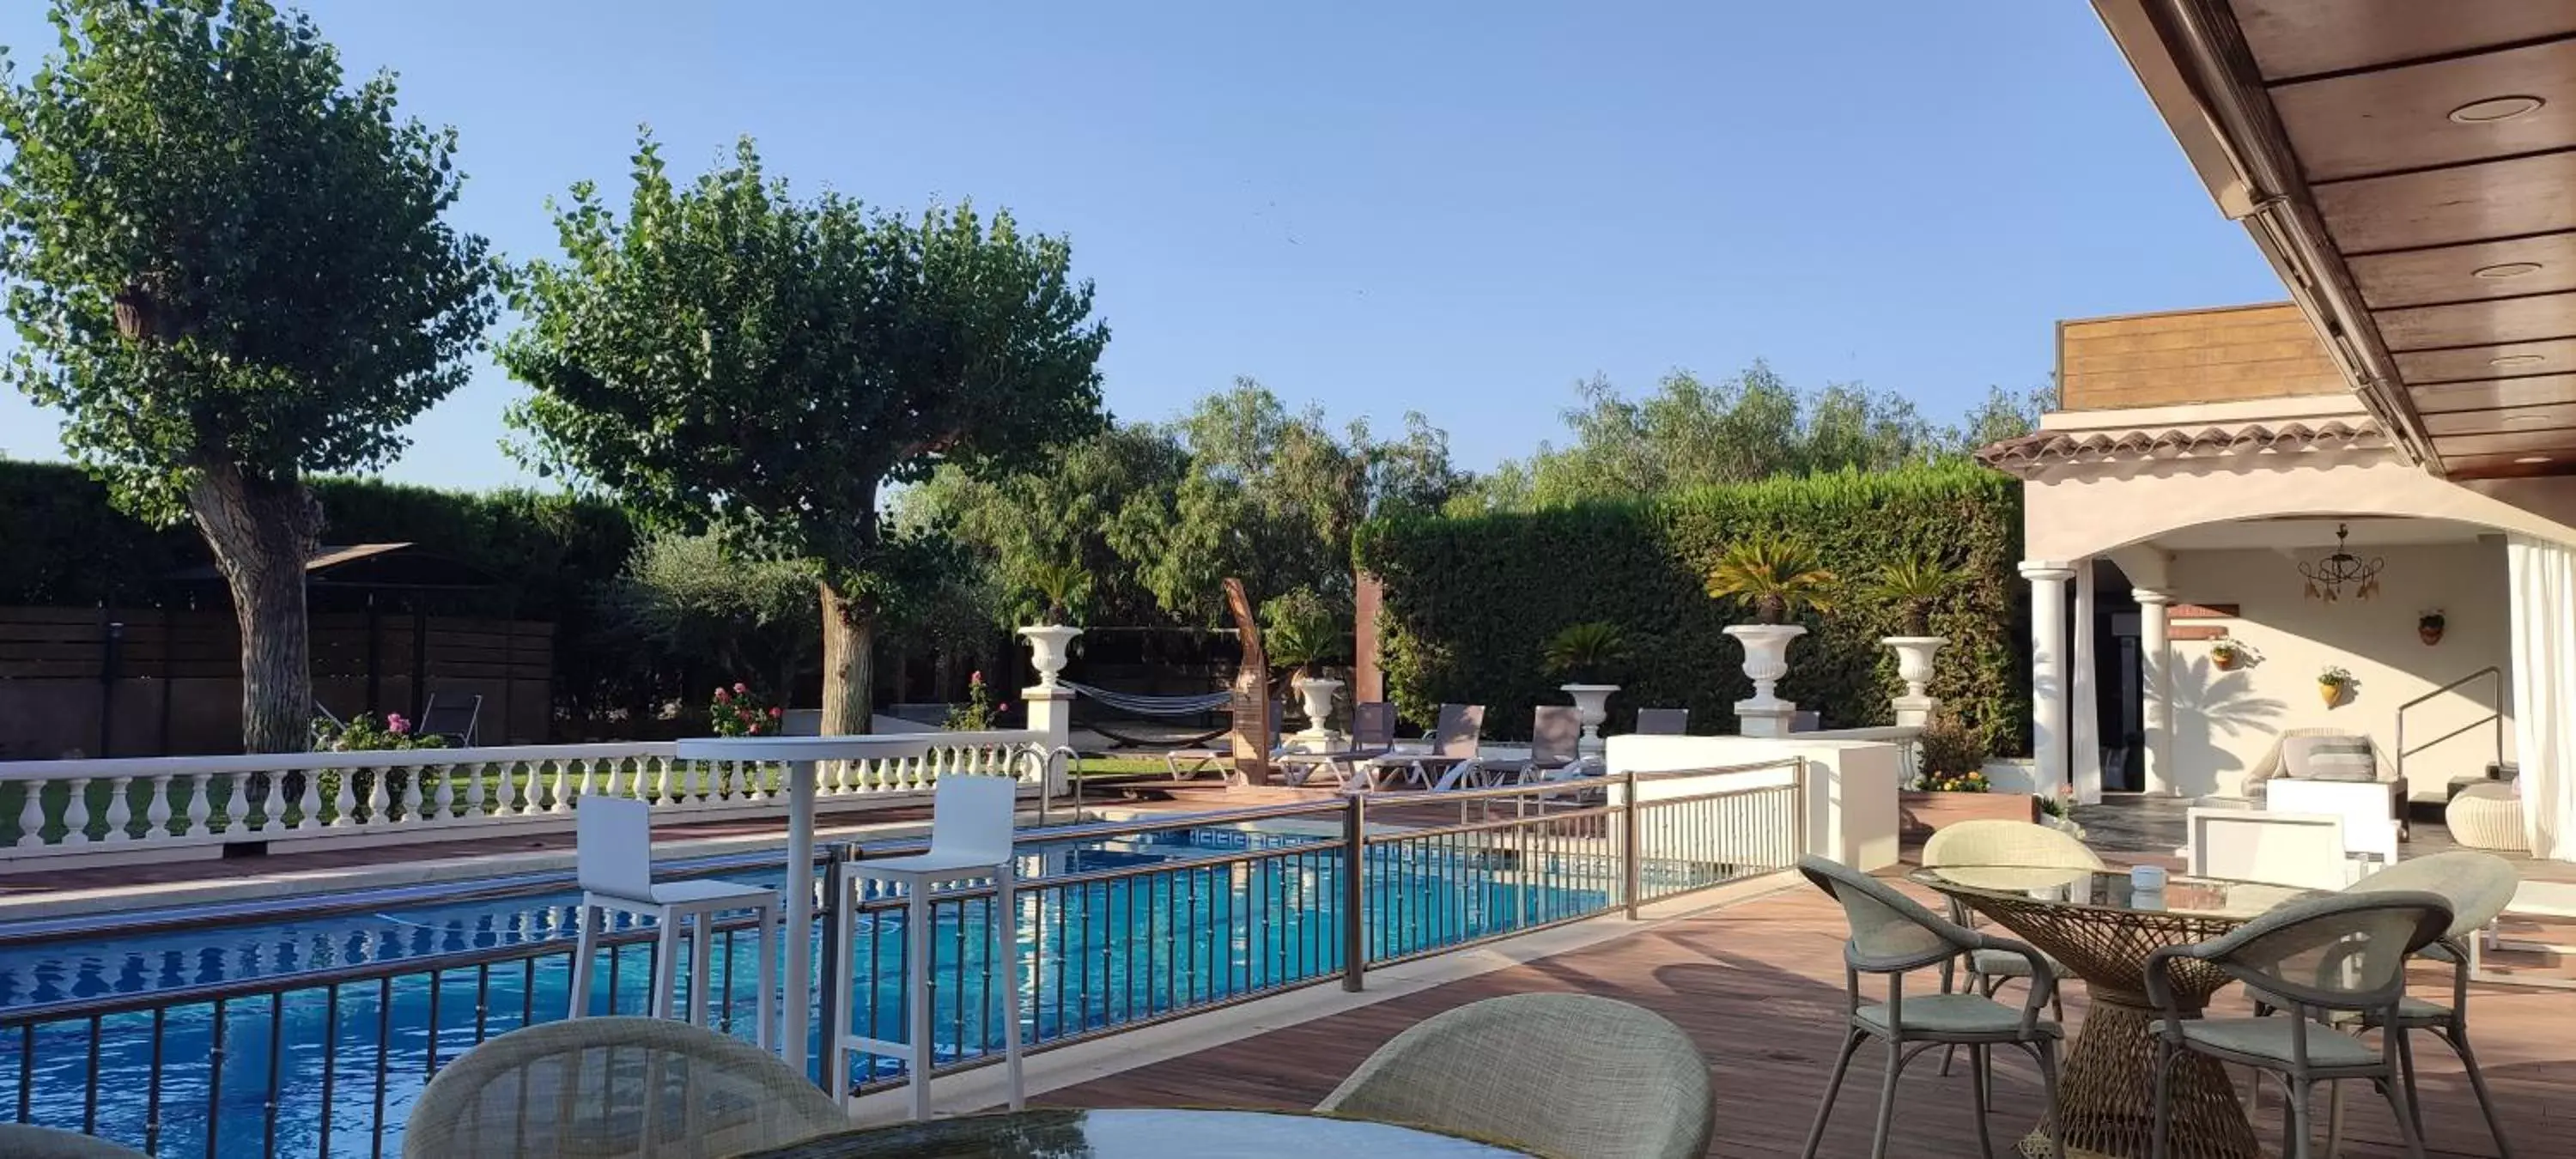 Balcony/Terrace, Swimming Pool in Hotel & Restaurant Figueres Parc